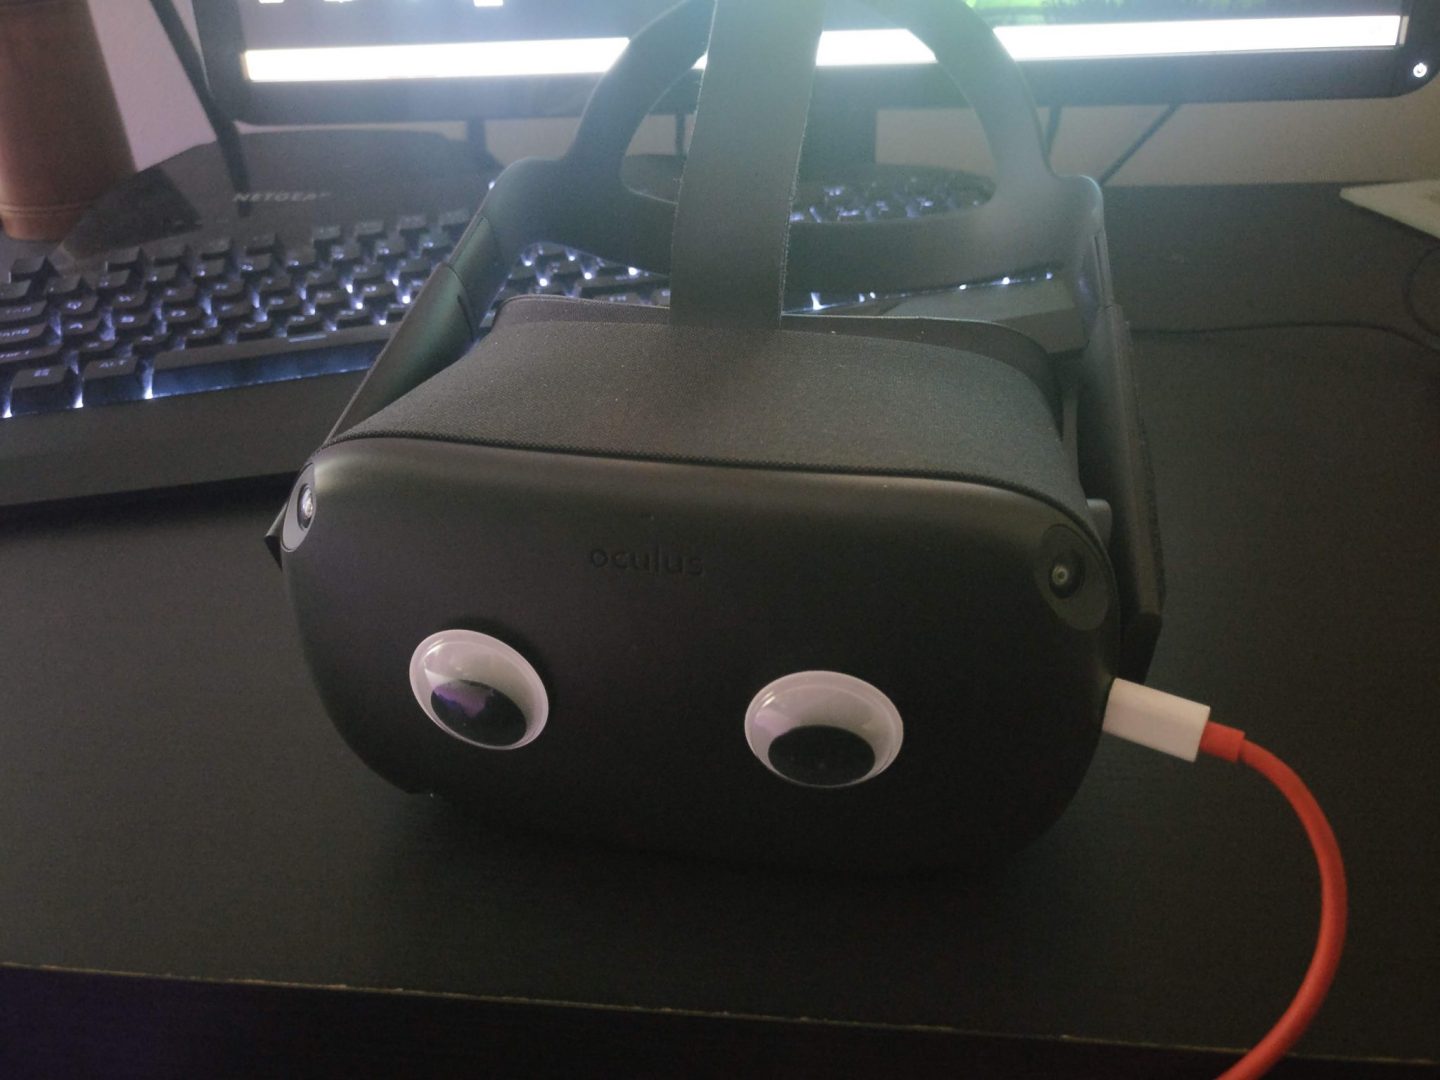 oculus quest connect to computer